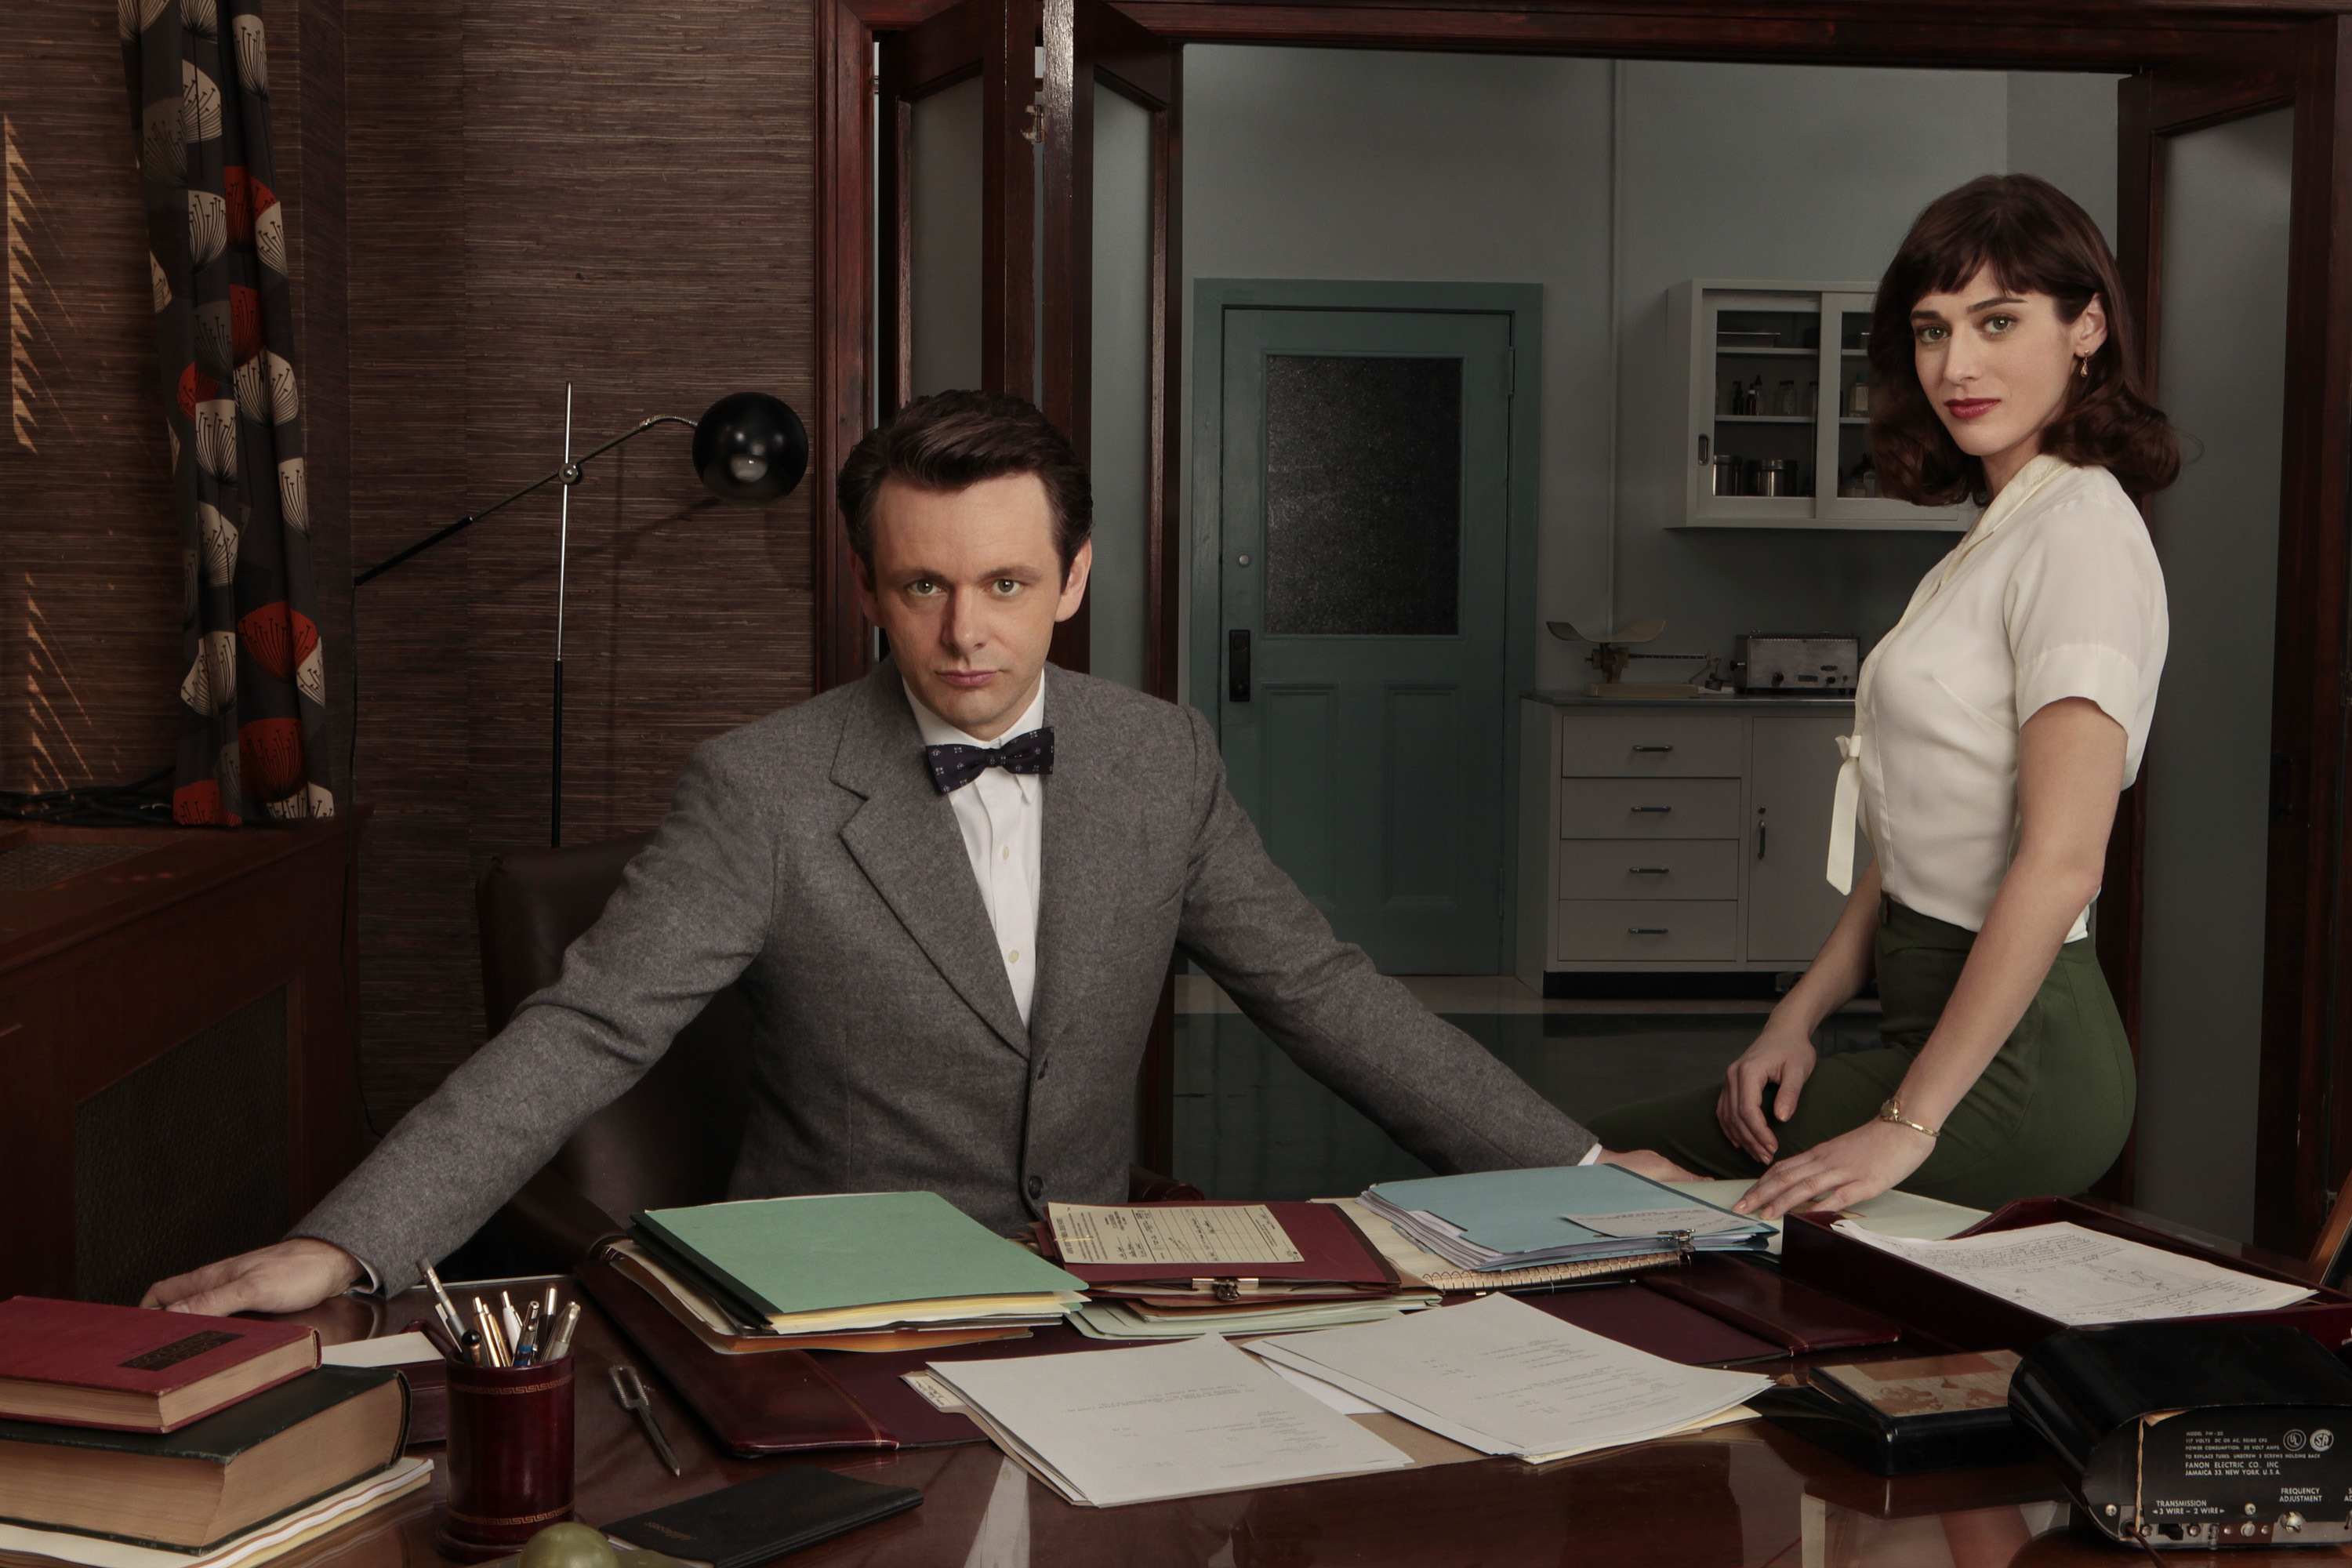 Michael Sheen as Dr. William Masters and Lizzy Caplan as Virginia Johnson in Masters of Sex (Pilot) - ) - Photo: Craig Blankenhorn/SHOWTIME - Photo ID: MastersOfSex_Pilot_caplan_sheen_077ra